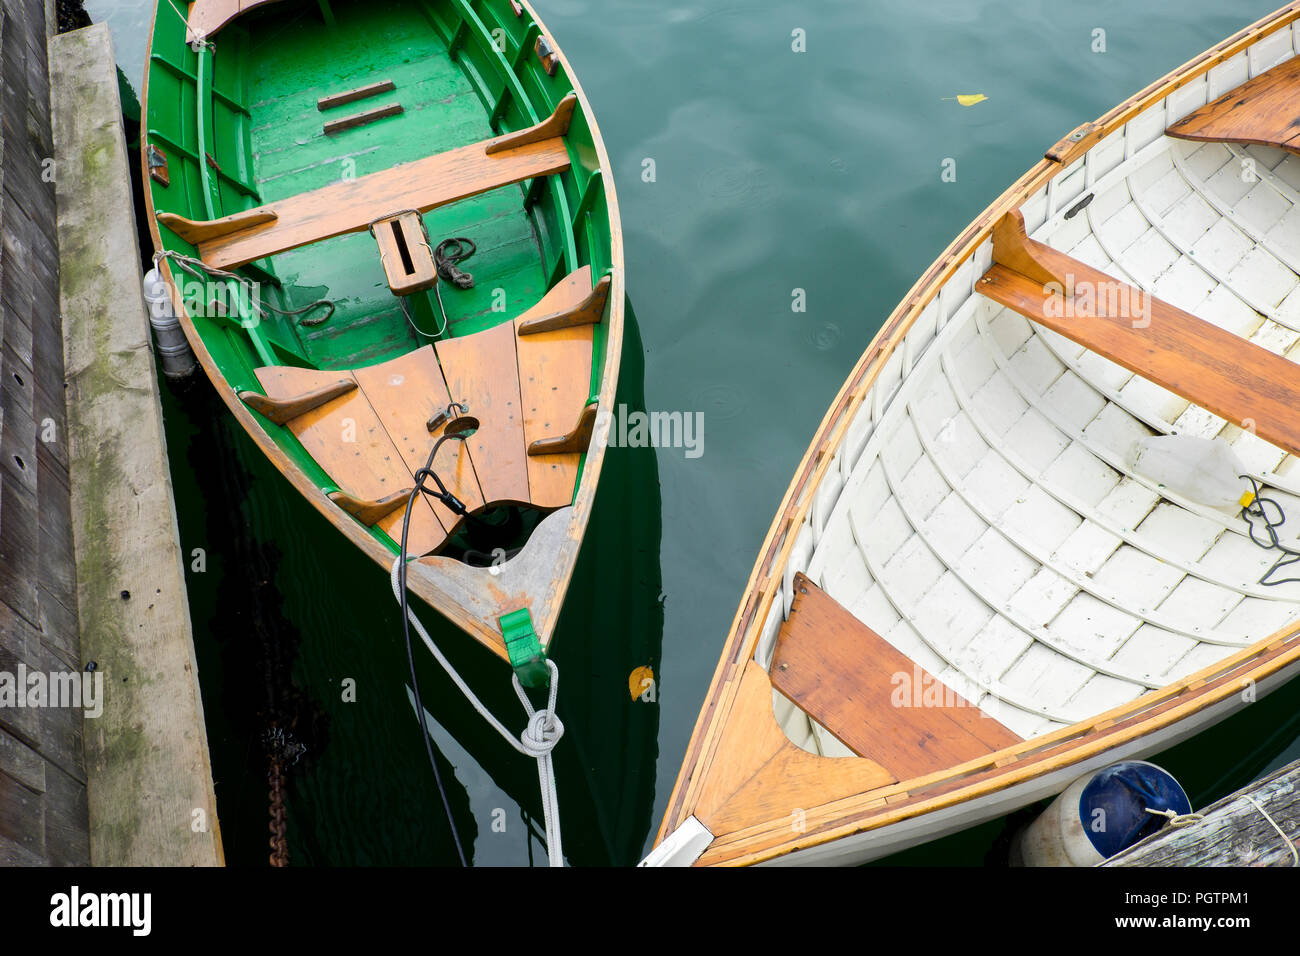 Looking down on two old wooden row boats one green the other white in Vancouver British Columbia. Stock Photo